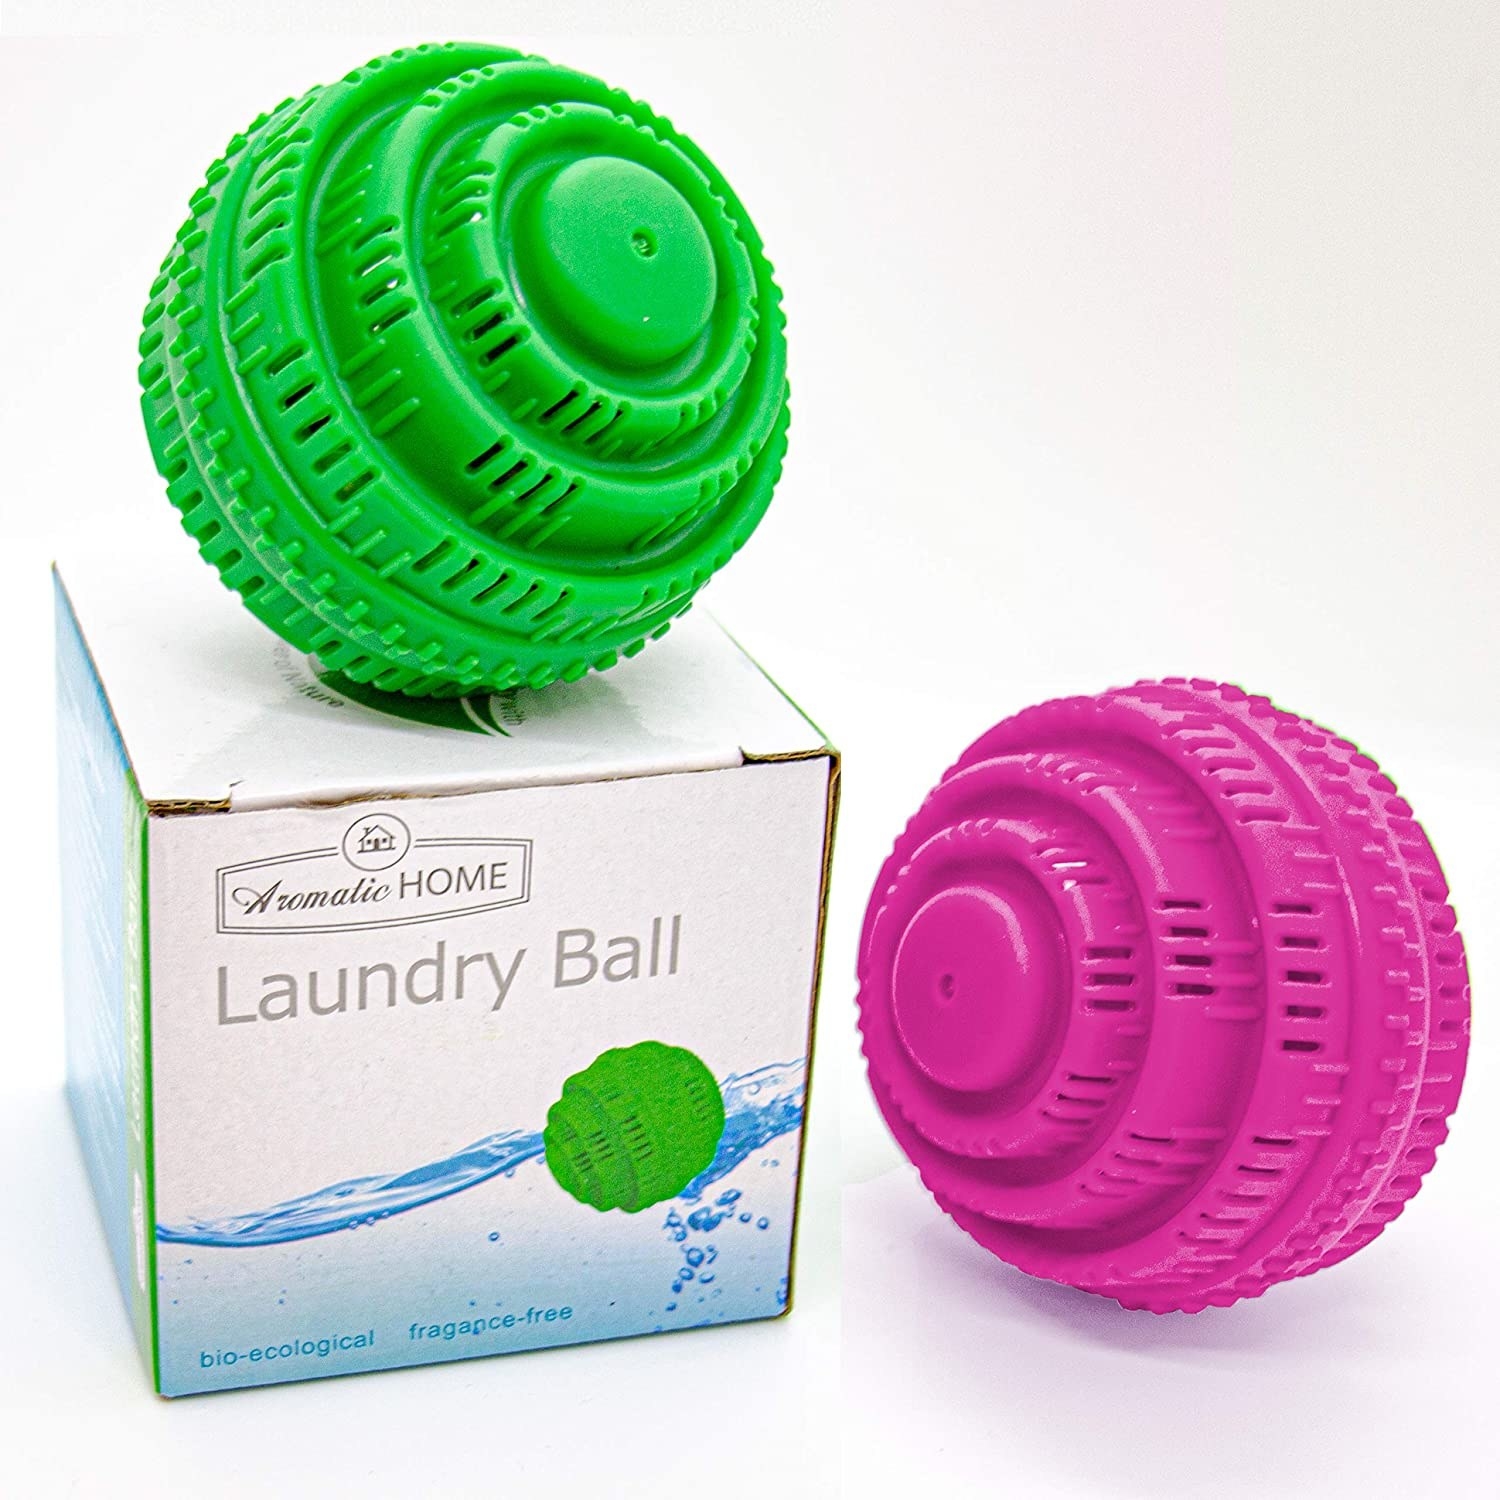 a bright green and bright pink laundry ball